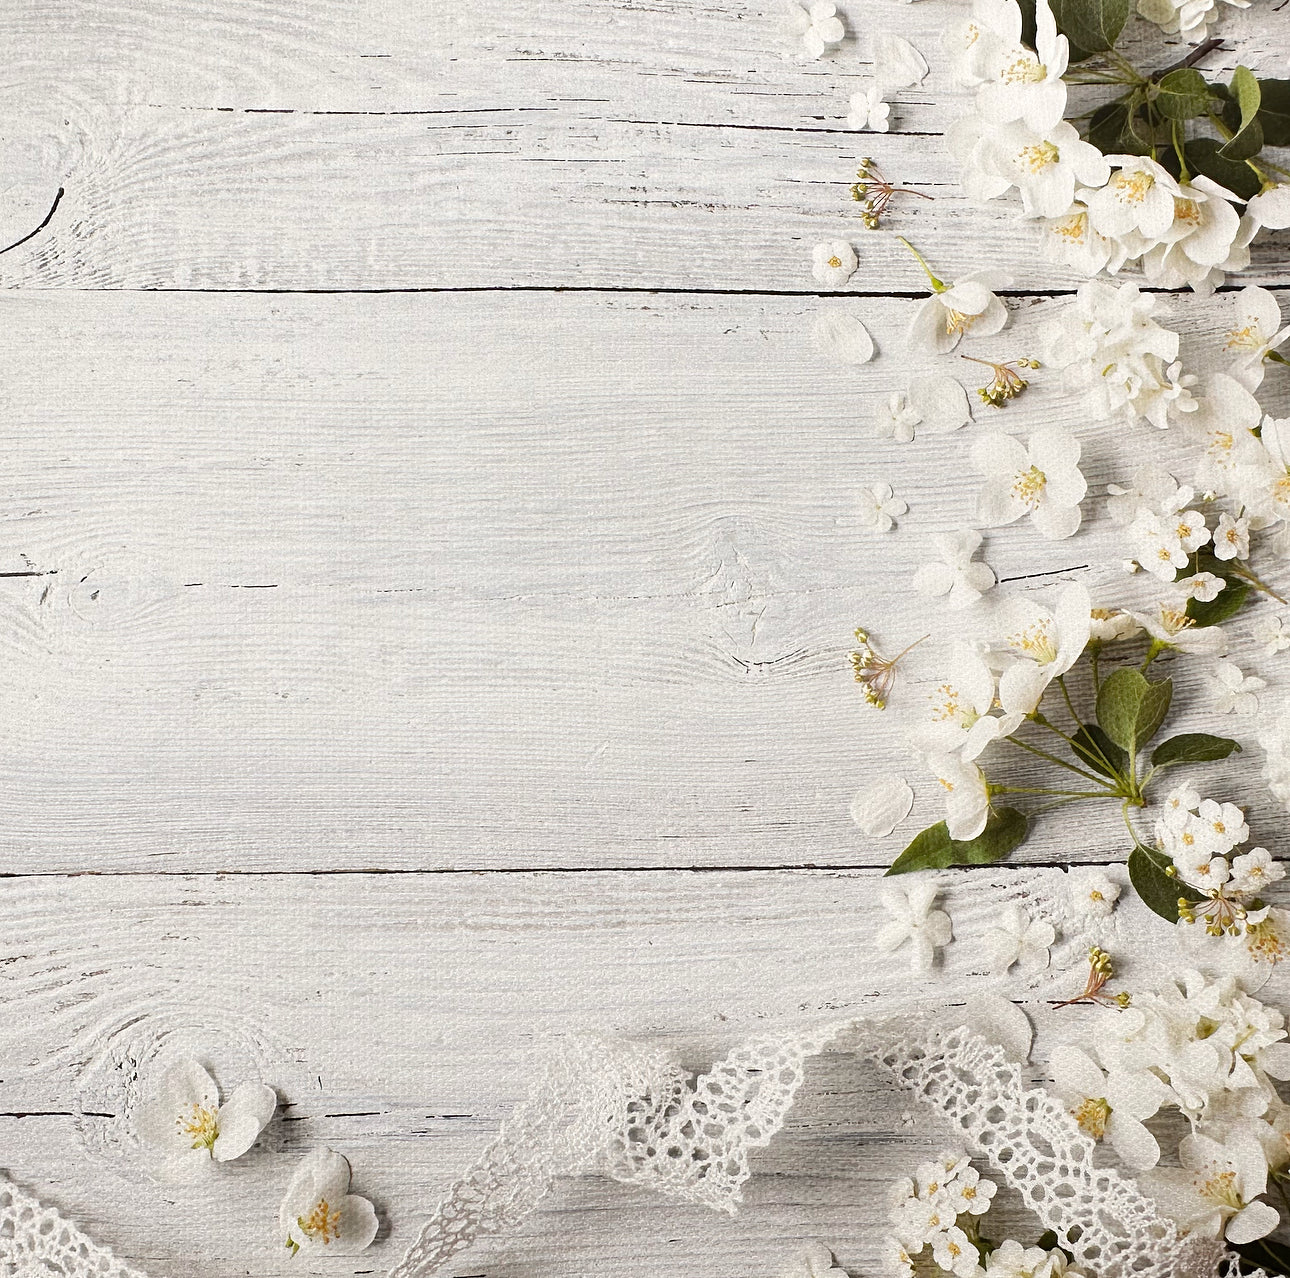 Ribbons & Flowers White Wooden Effect Canvas Photography Background